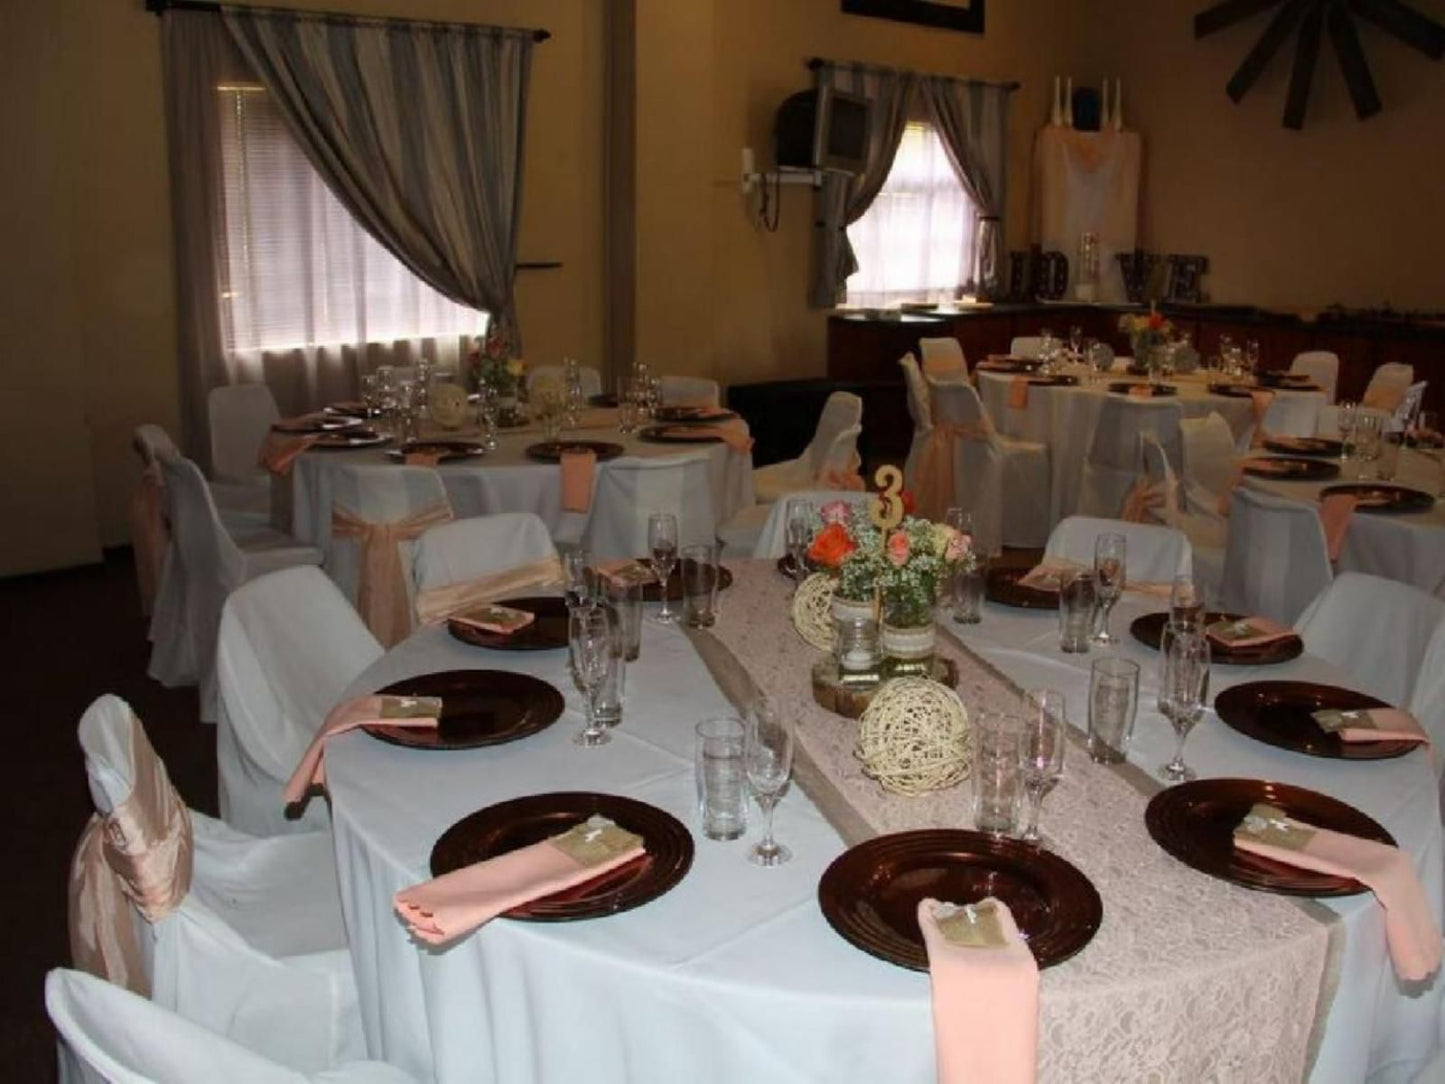 The Venue And Guest Rooms On Site Potchefstroom North West Province South Africa Place Cover, Food